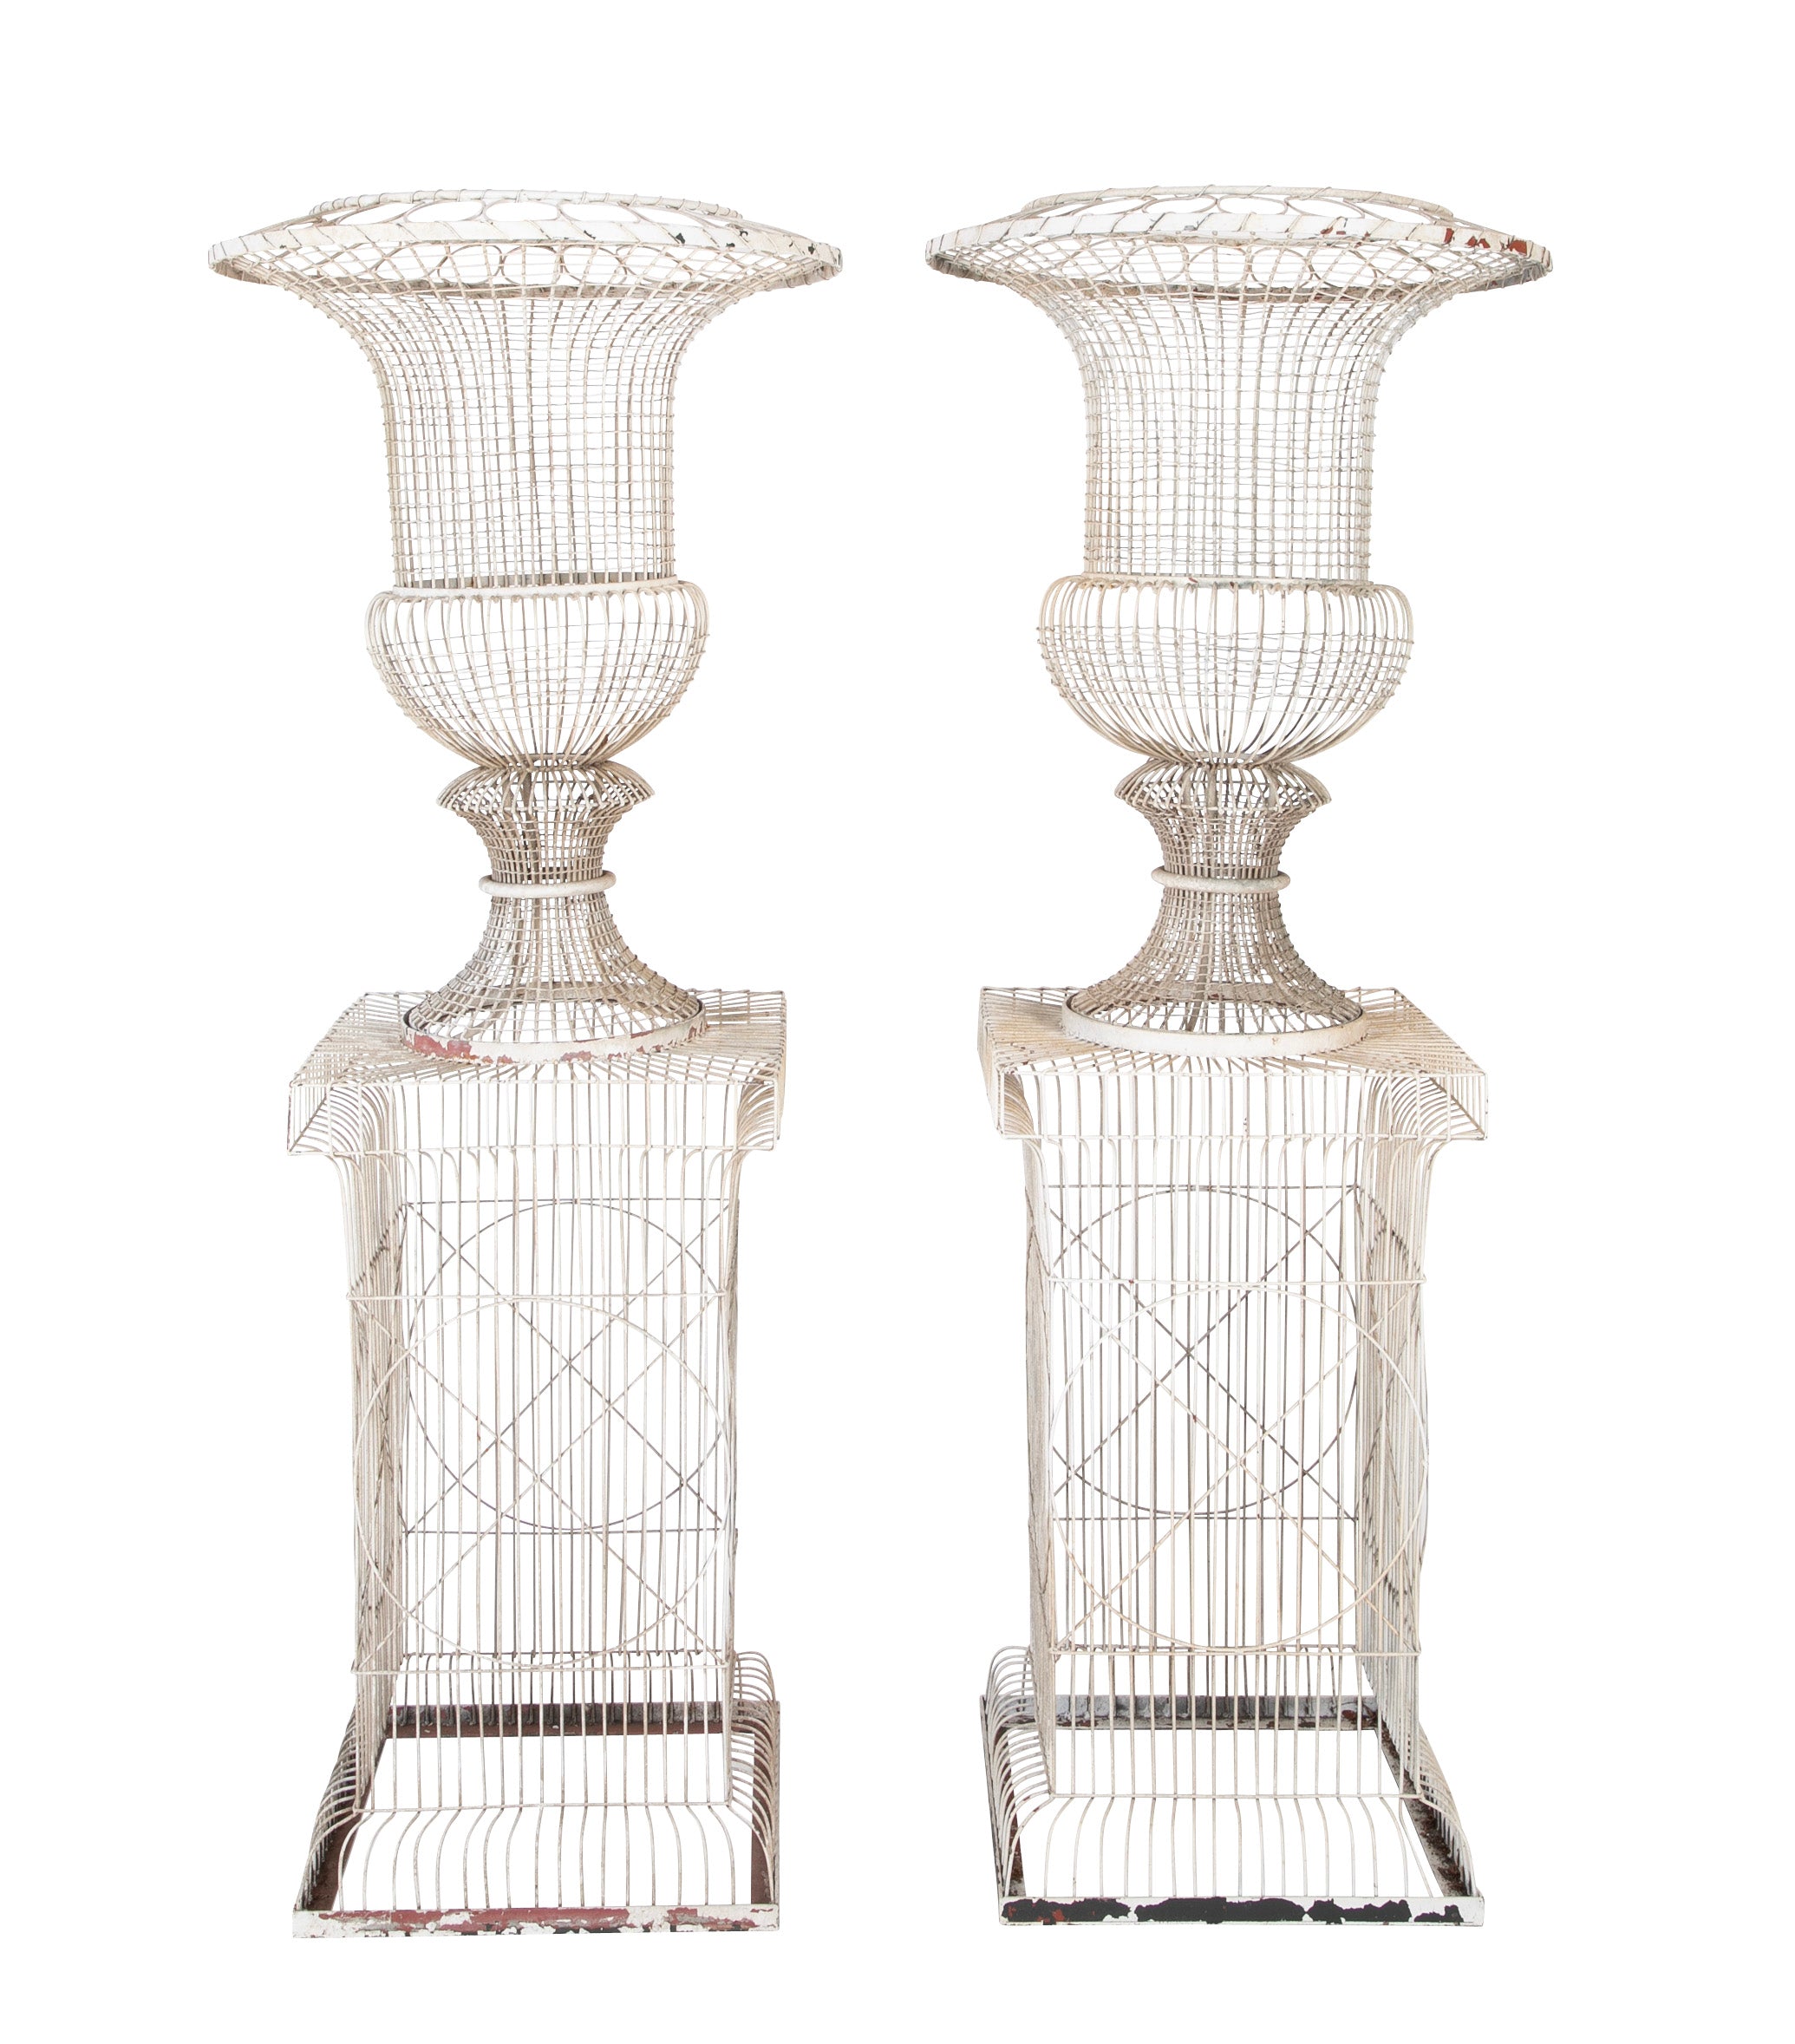 Fabulous Pair of French Urn Form Wire Planters